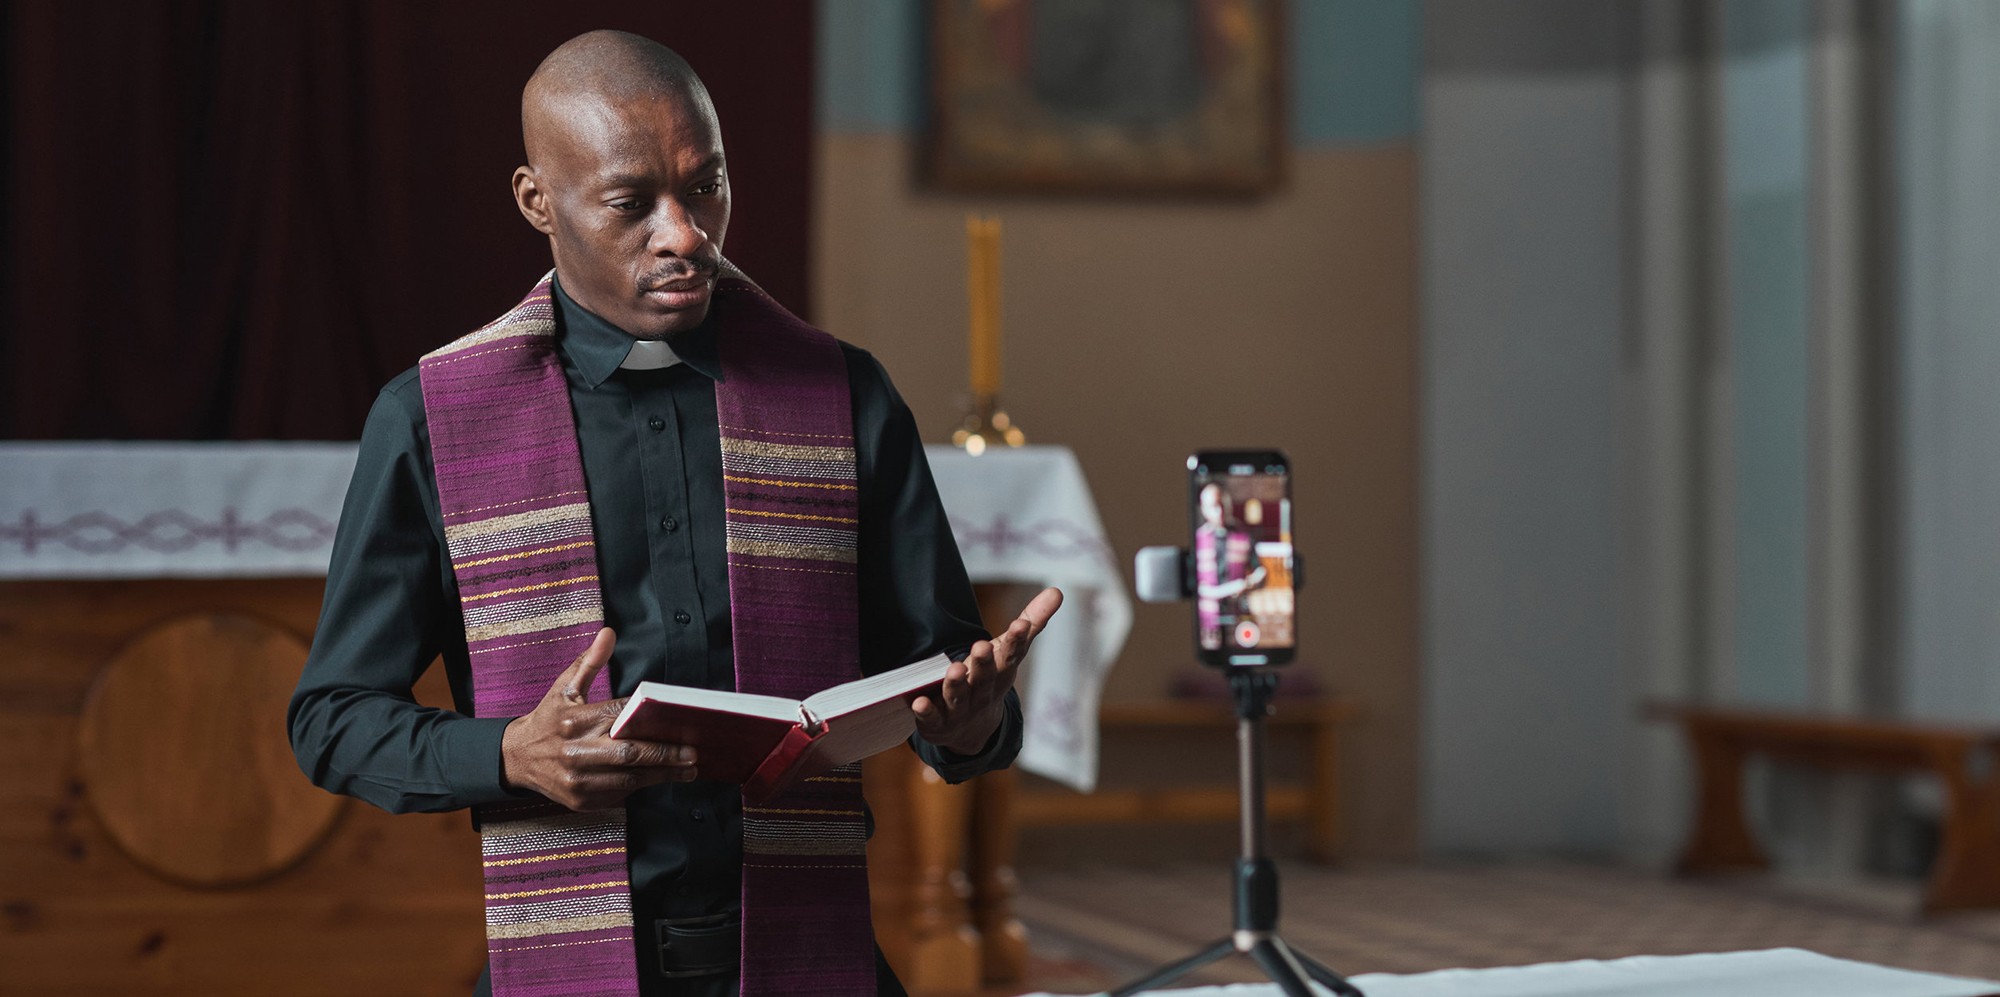 Caleb’s Youngsters and the Evolving Technological Landscape of the Black Church